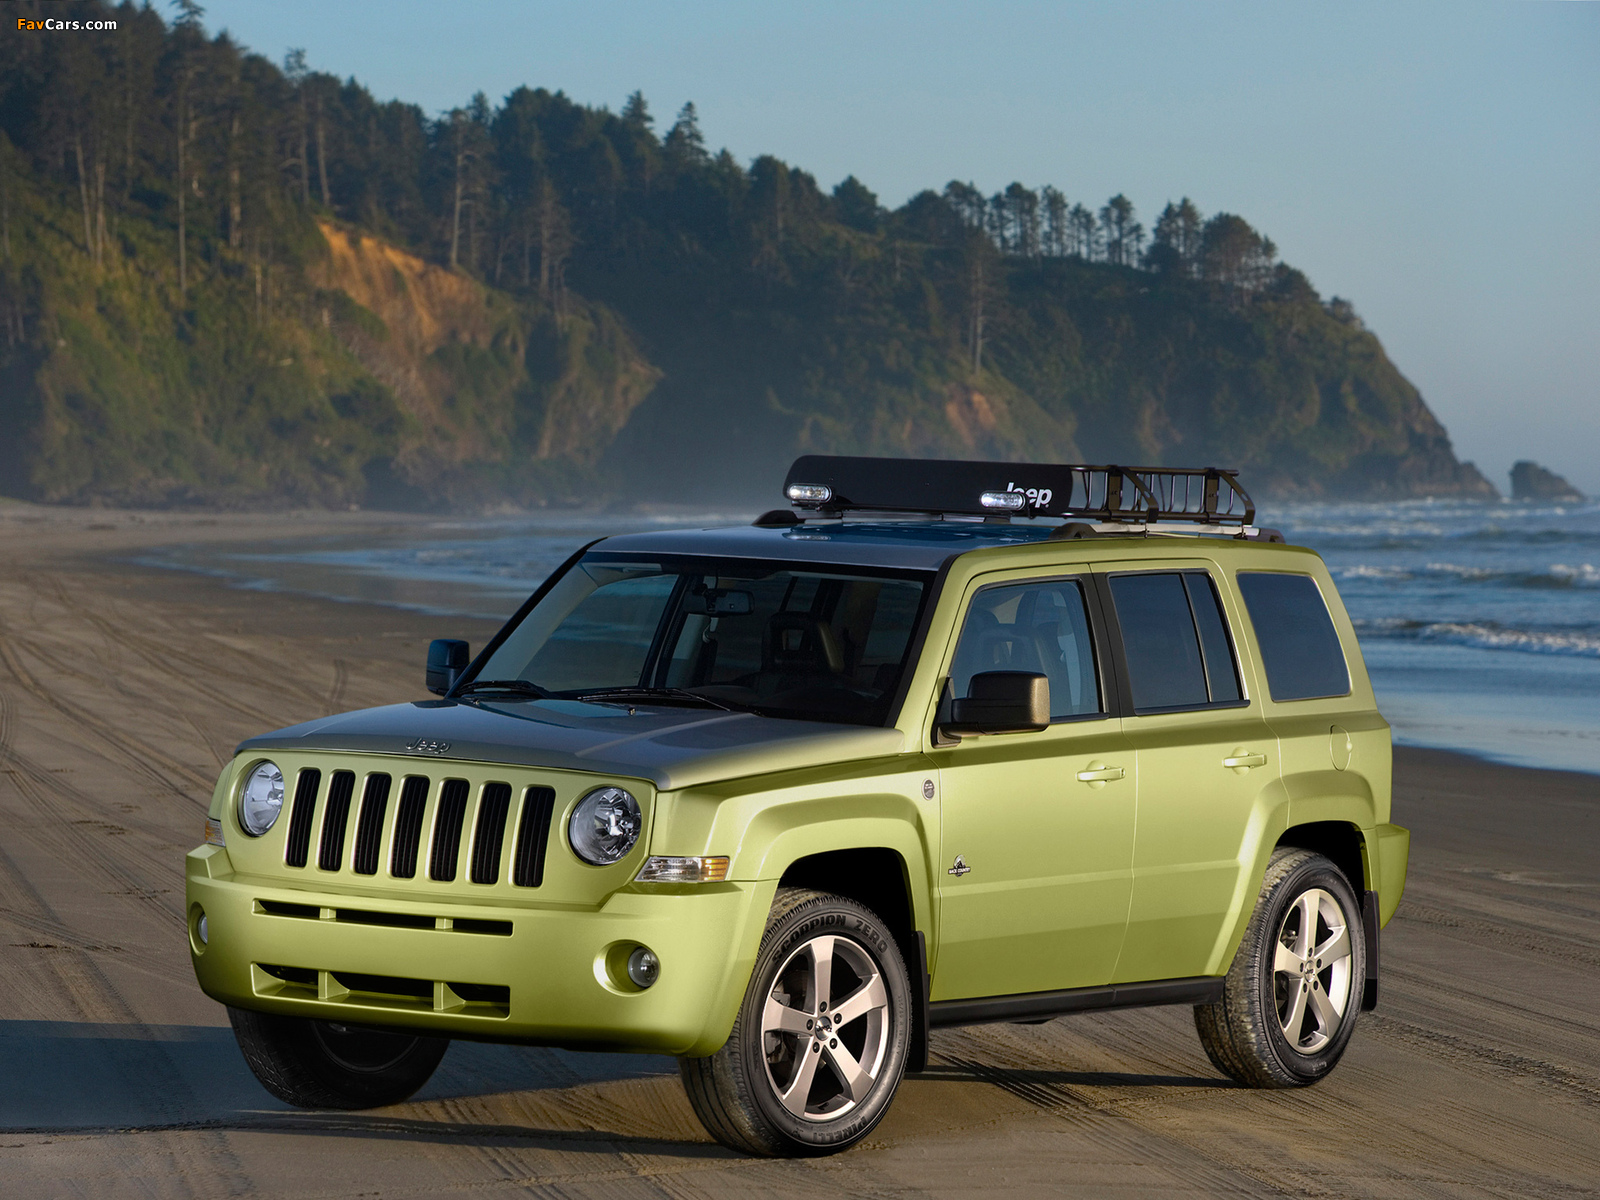 Jeep Patriot Back Country 2008 photos (1600x1200)